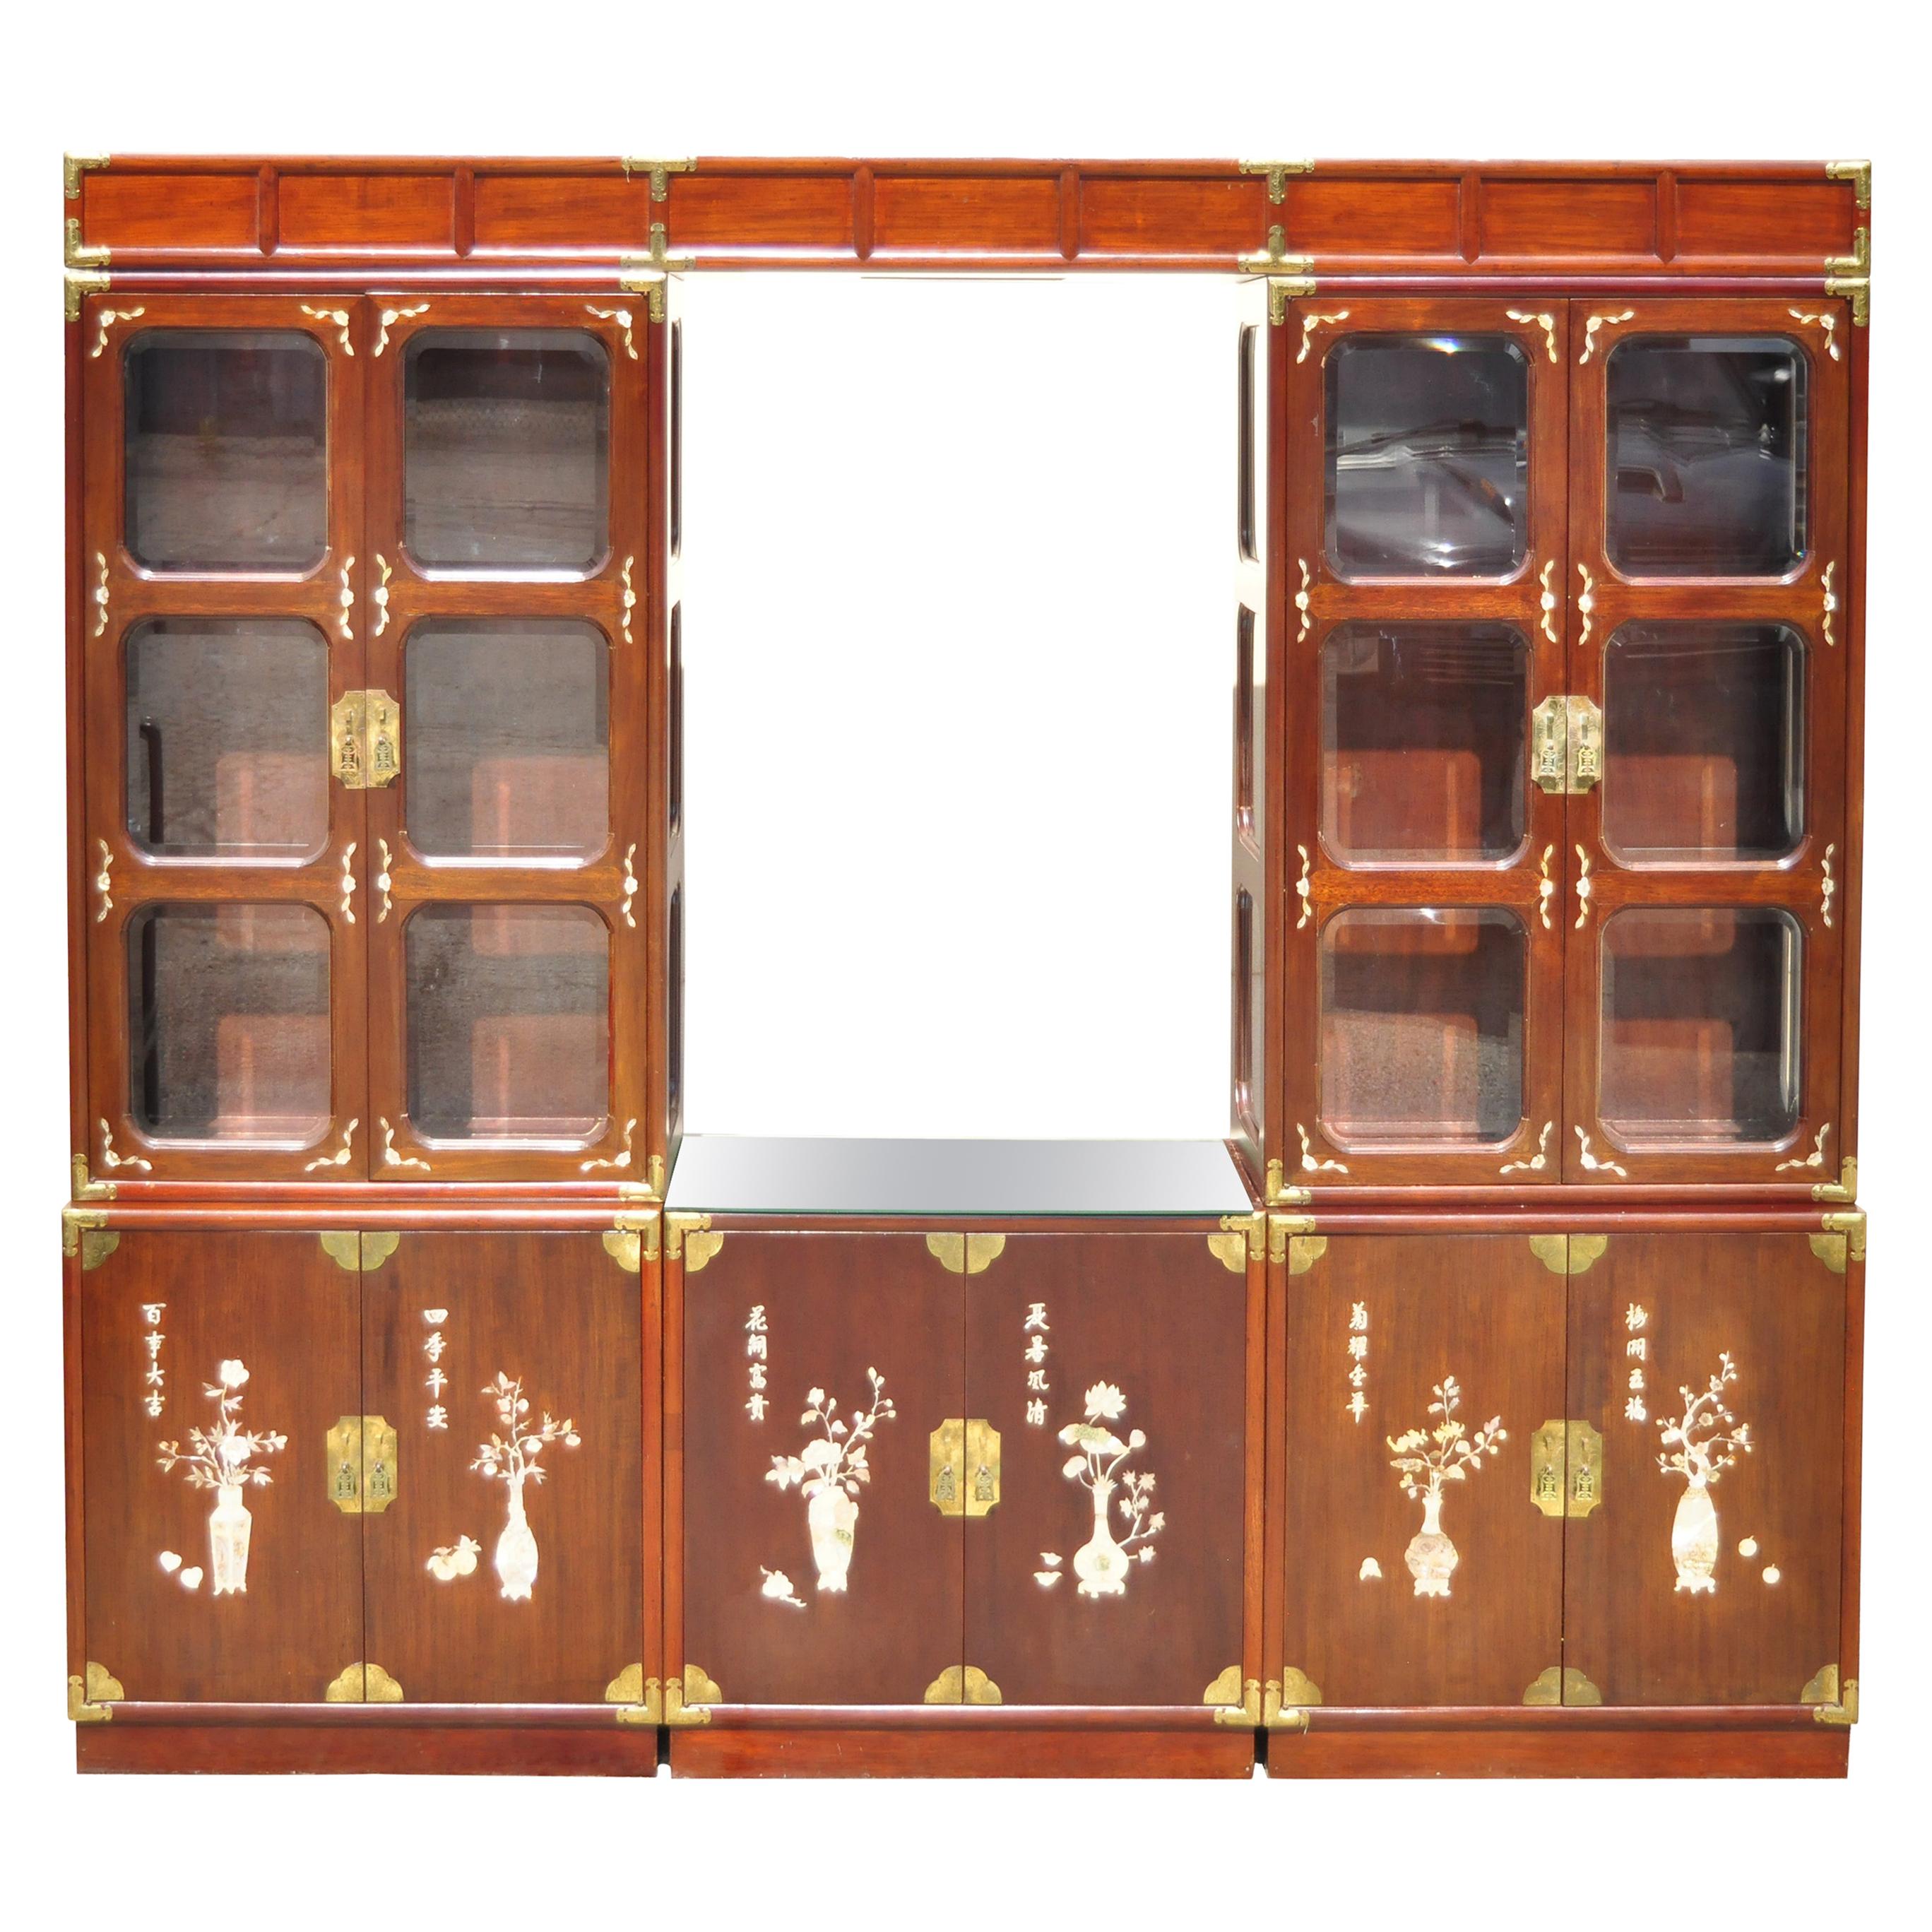 Asian Mother of Pearl Rosewood Cherry Lg China Cabinet Curio Display Wall Unit